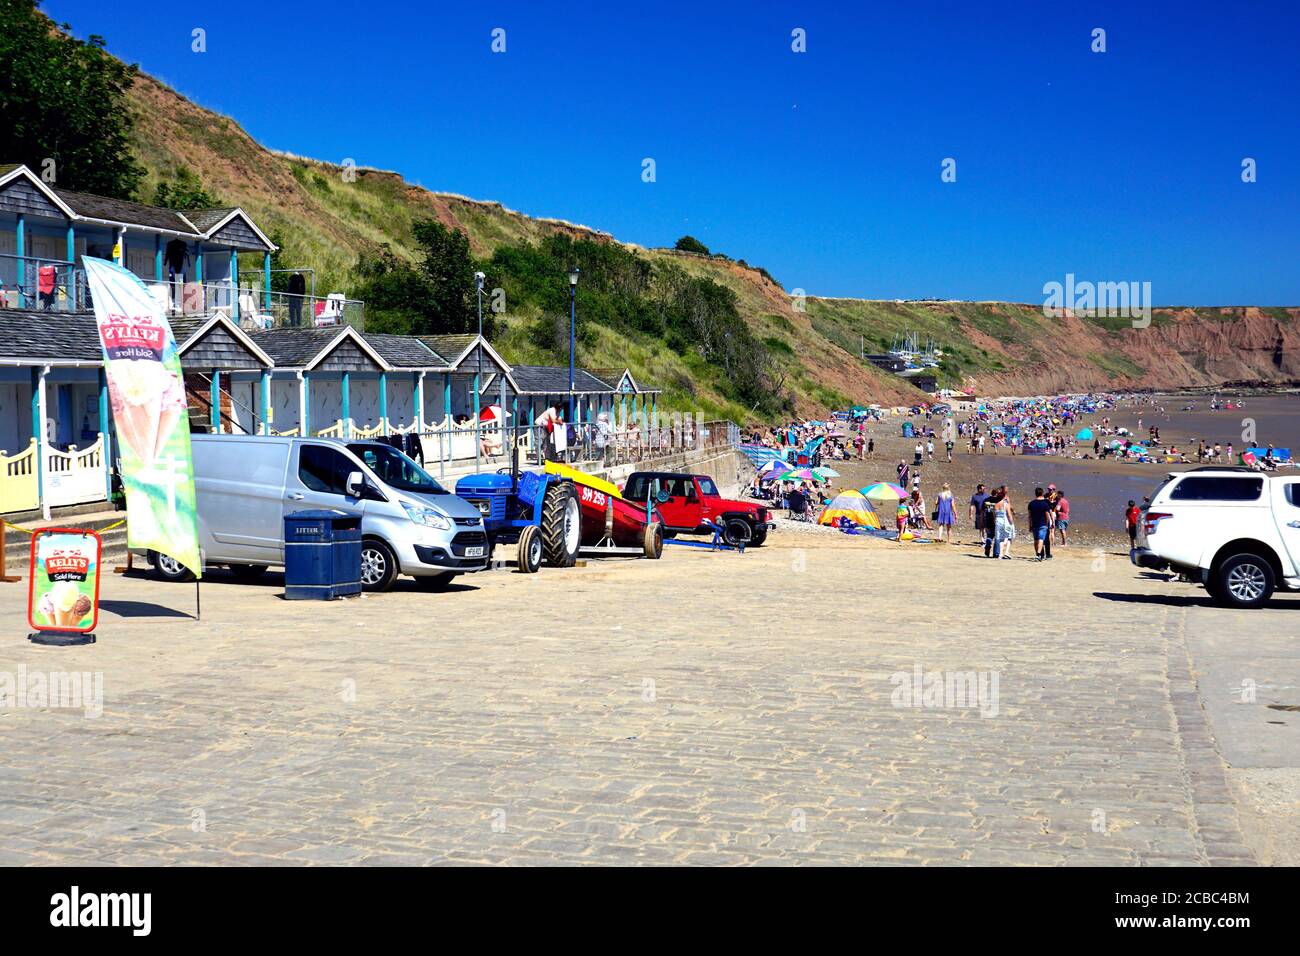 Filey, Yorkshire, UK. August 07, 2020. Holidaymakers enjoying the facilities and beach chalets after the Covid-19 lockdown on Coble landing at Filey i Stock Photo